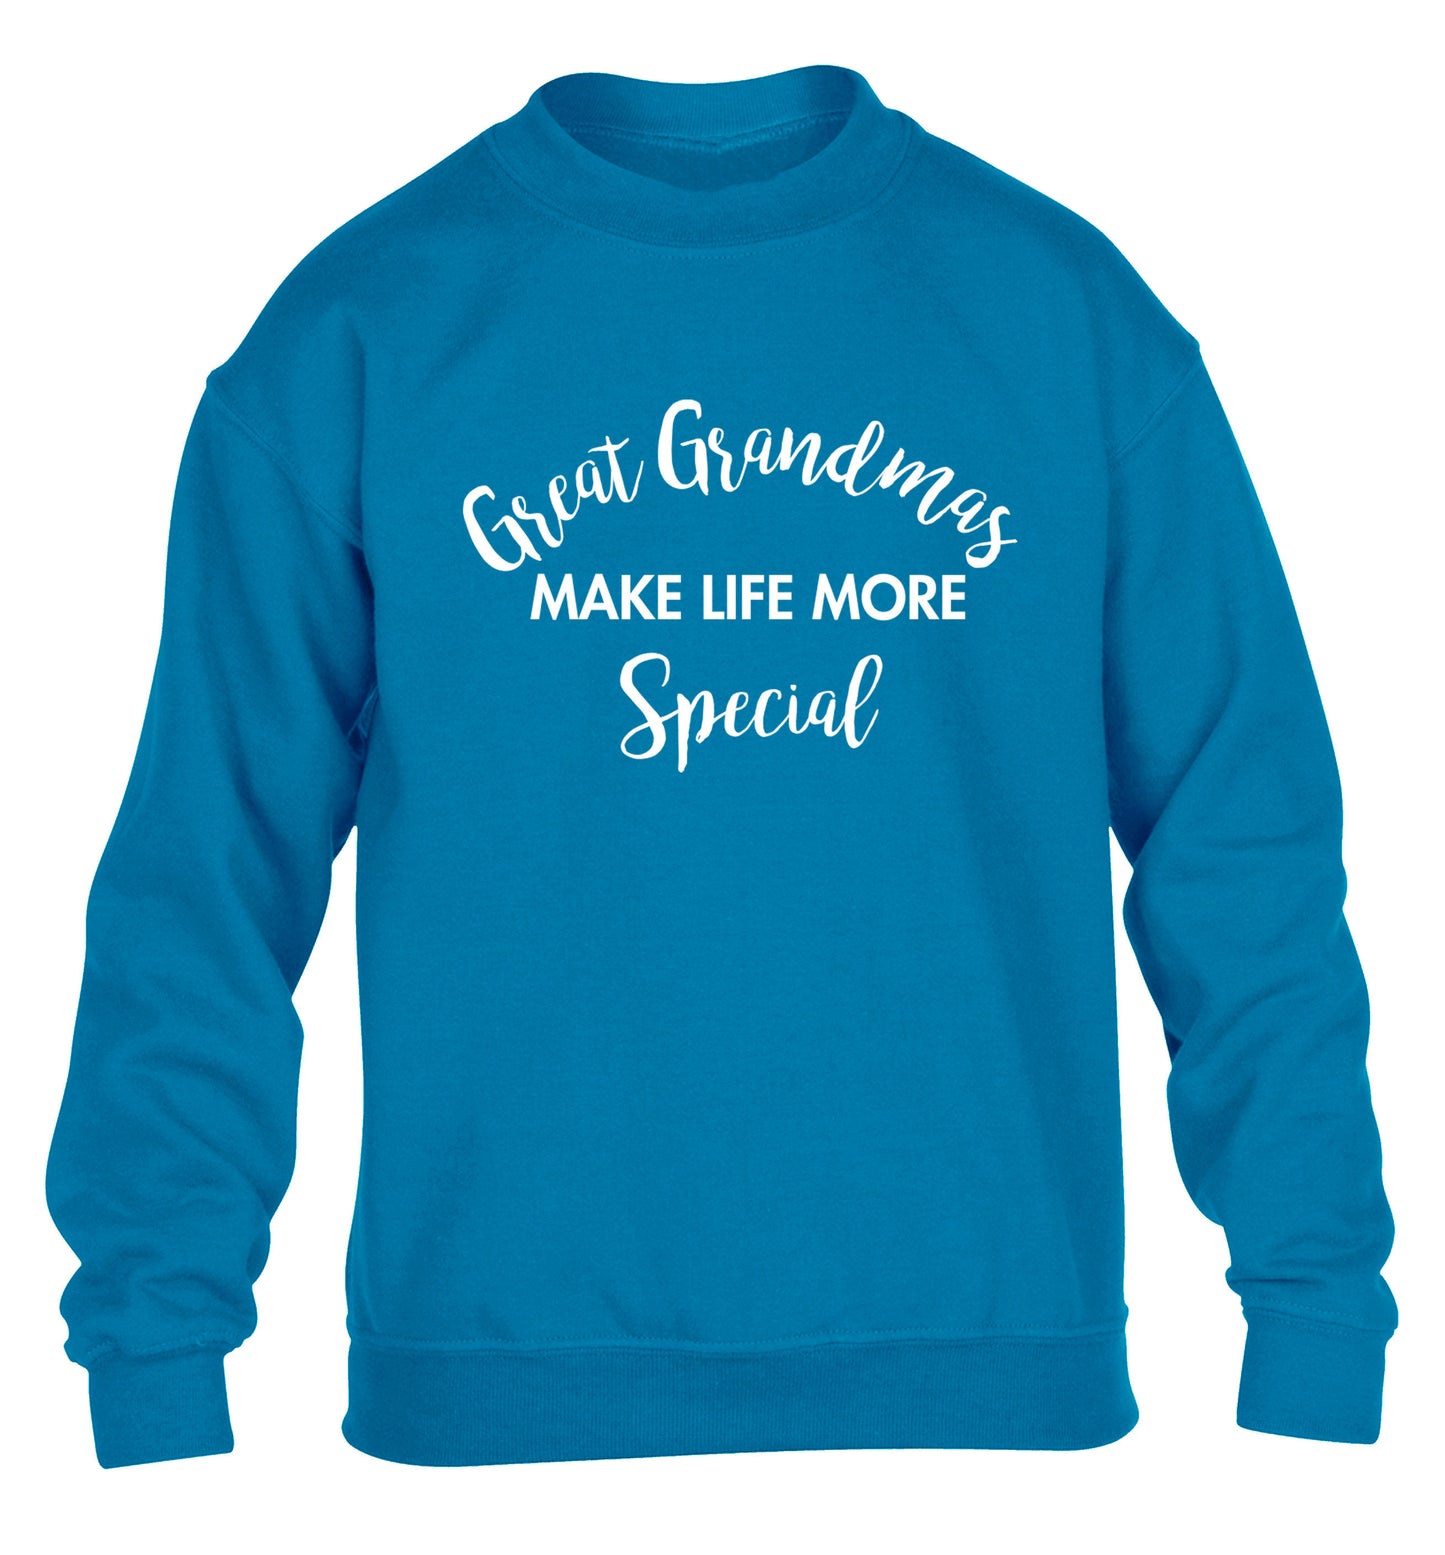 Great Grandmas make life more special children's blue sweater 12-14 Years